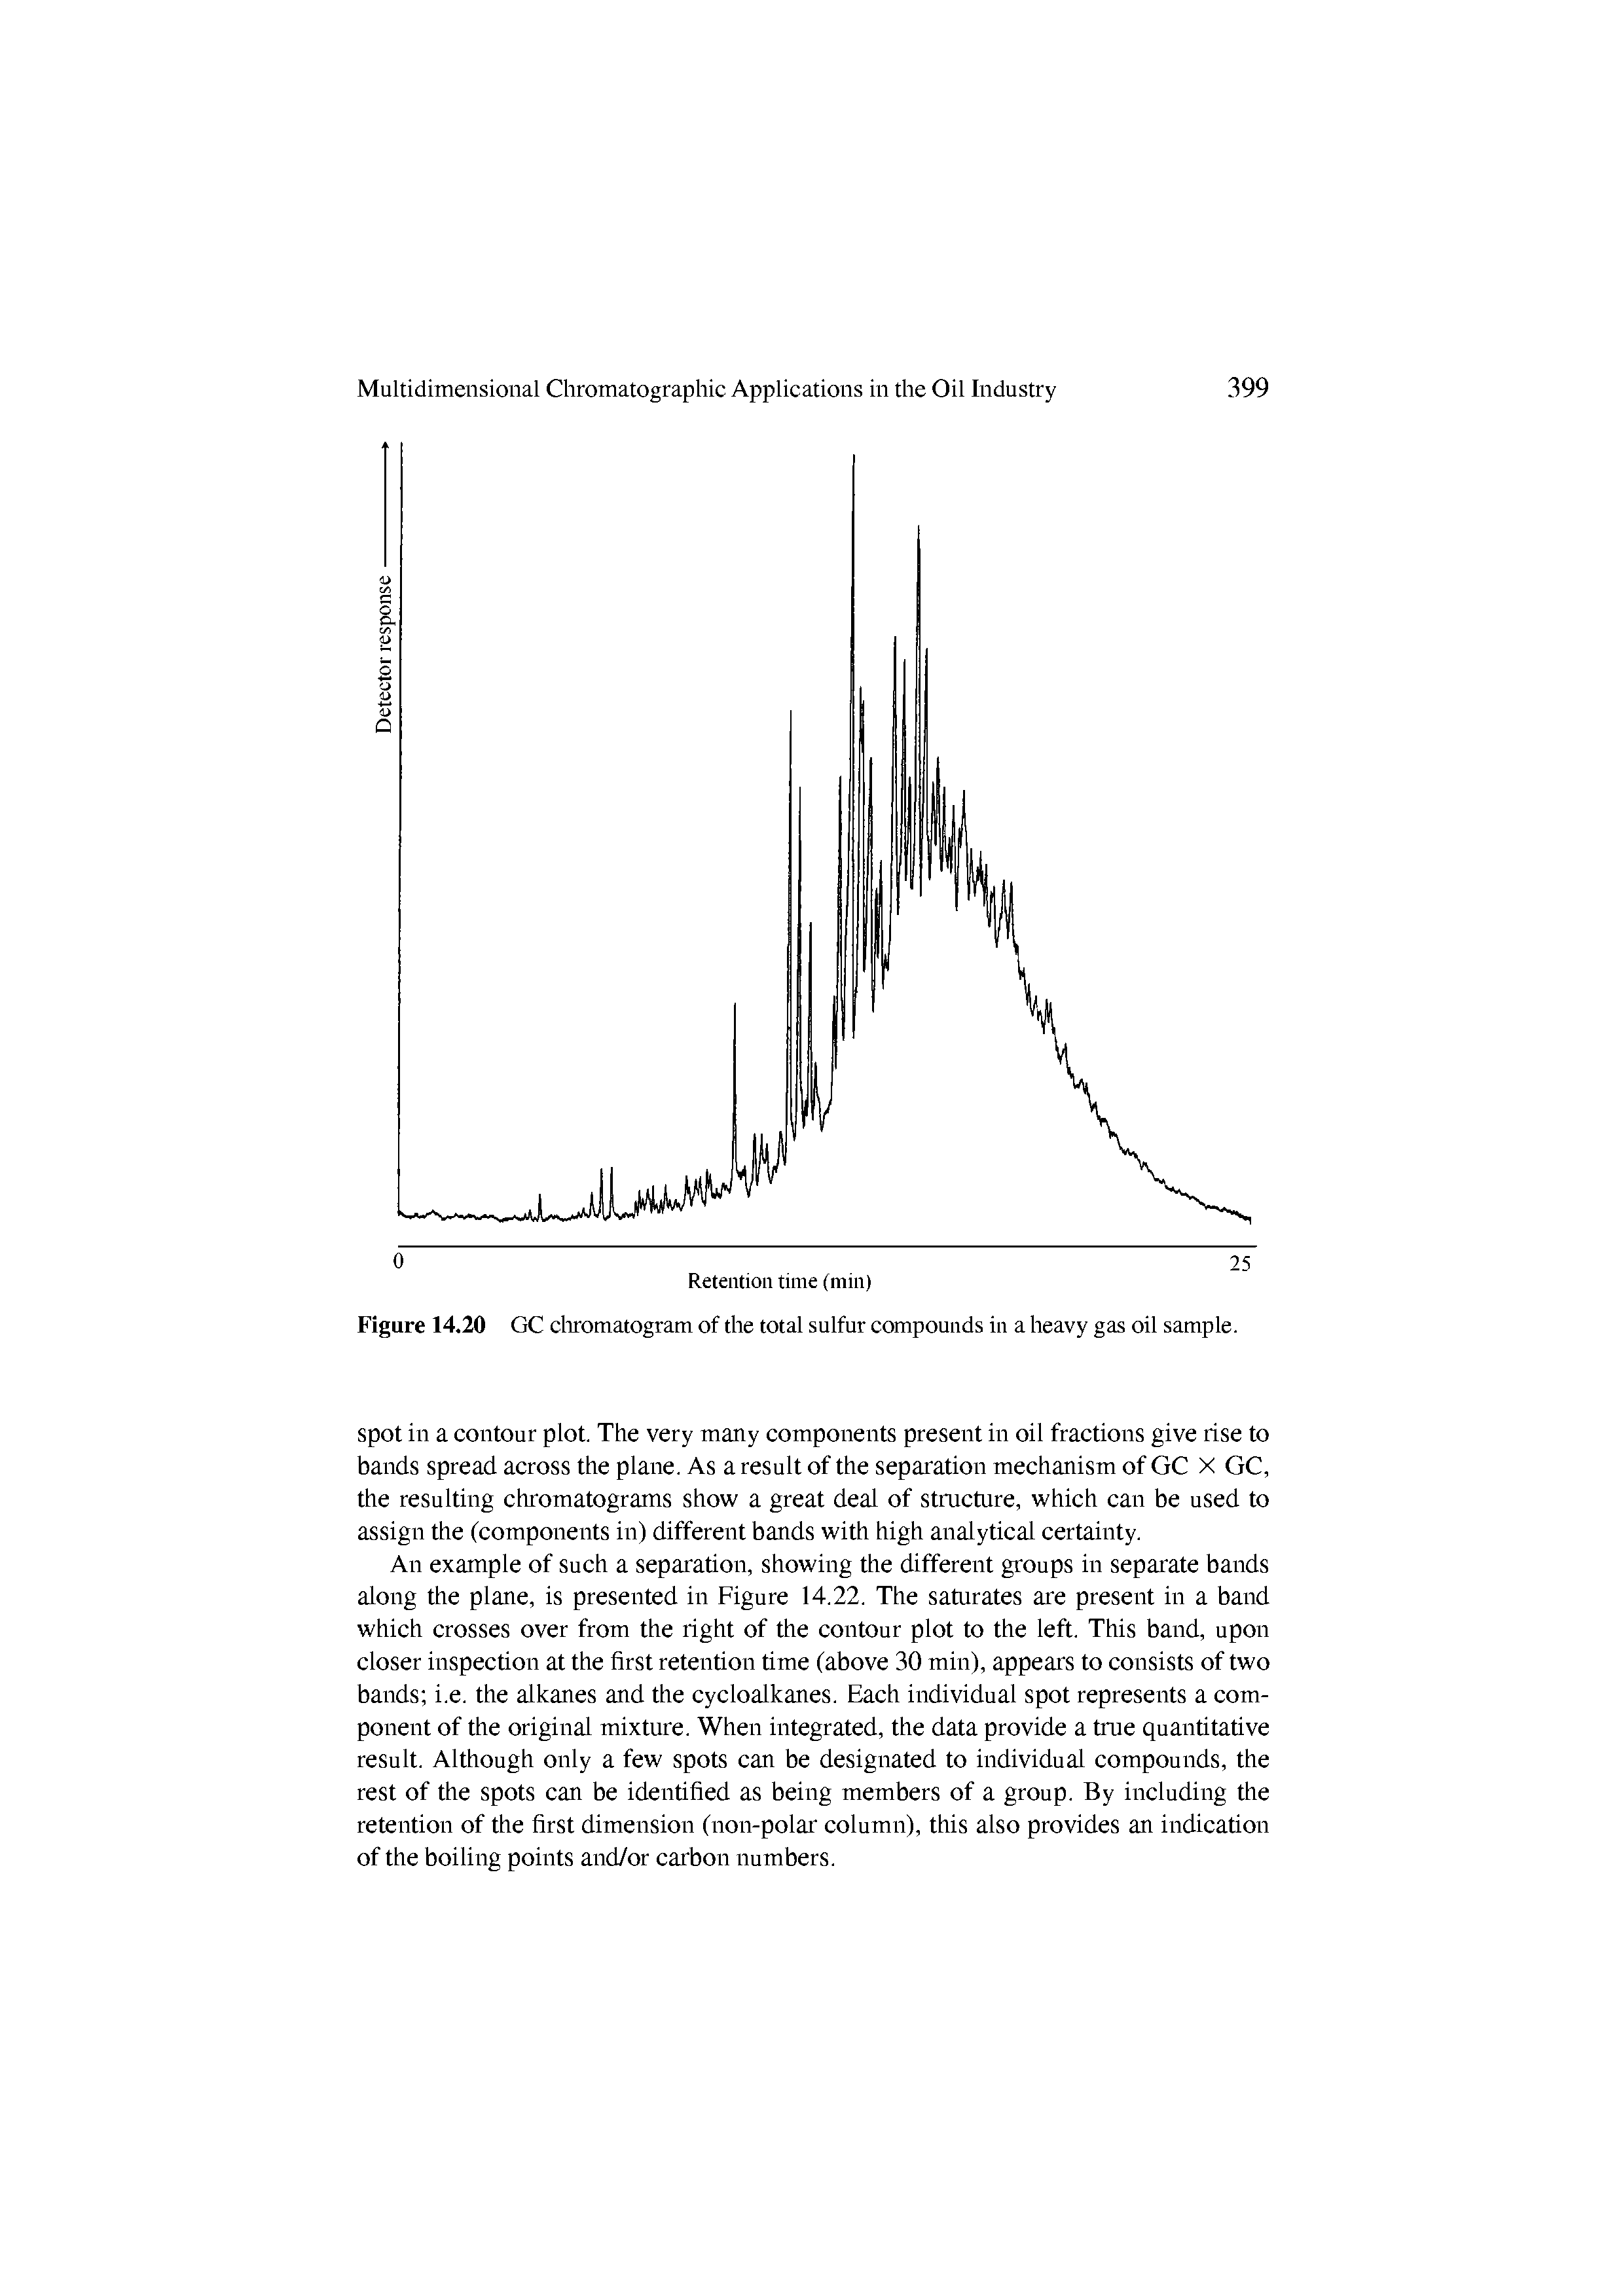 Figure 14.20 GC cliromatogram of the total sulfur compounds in a heavy gas oil sample.